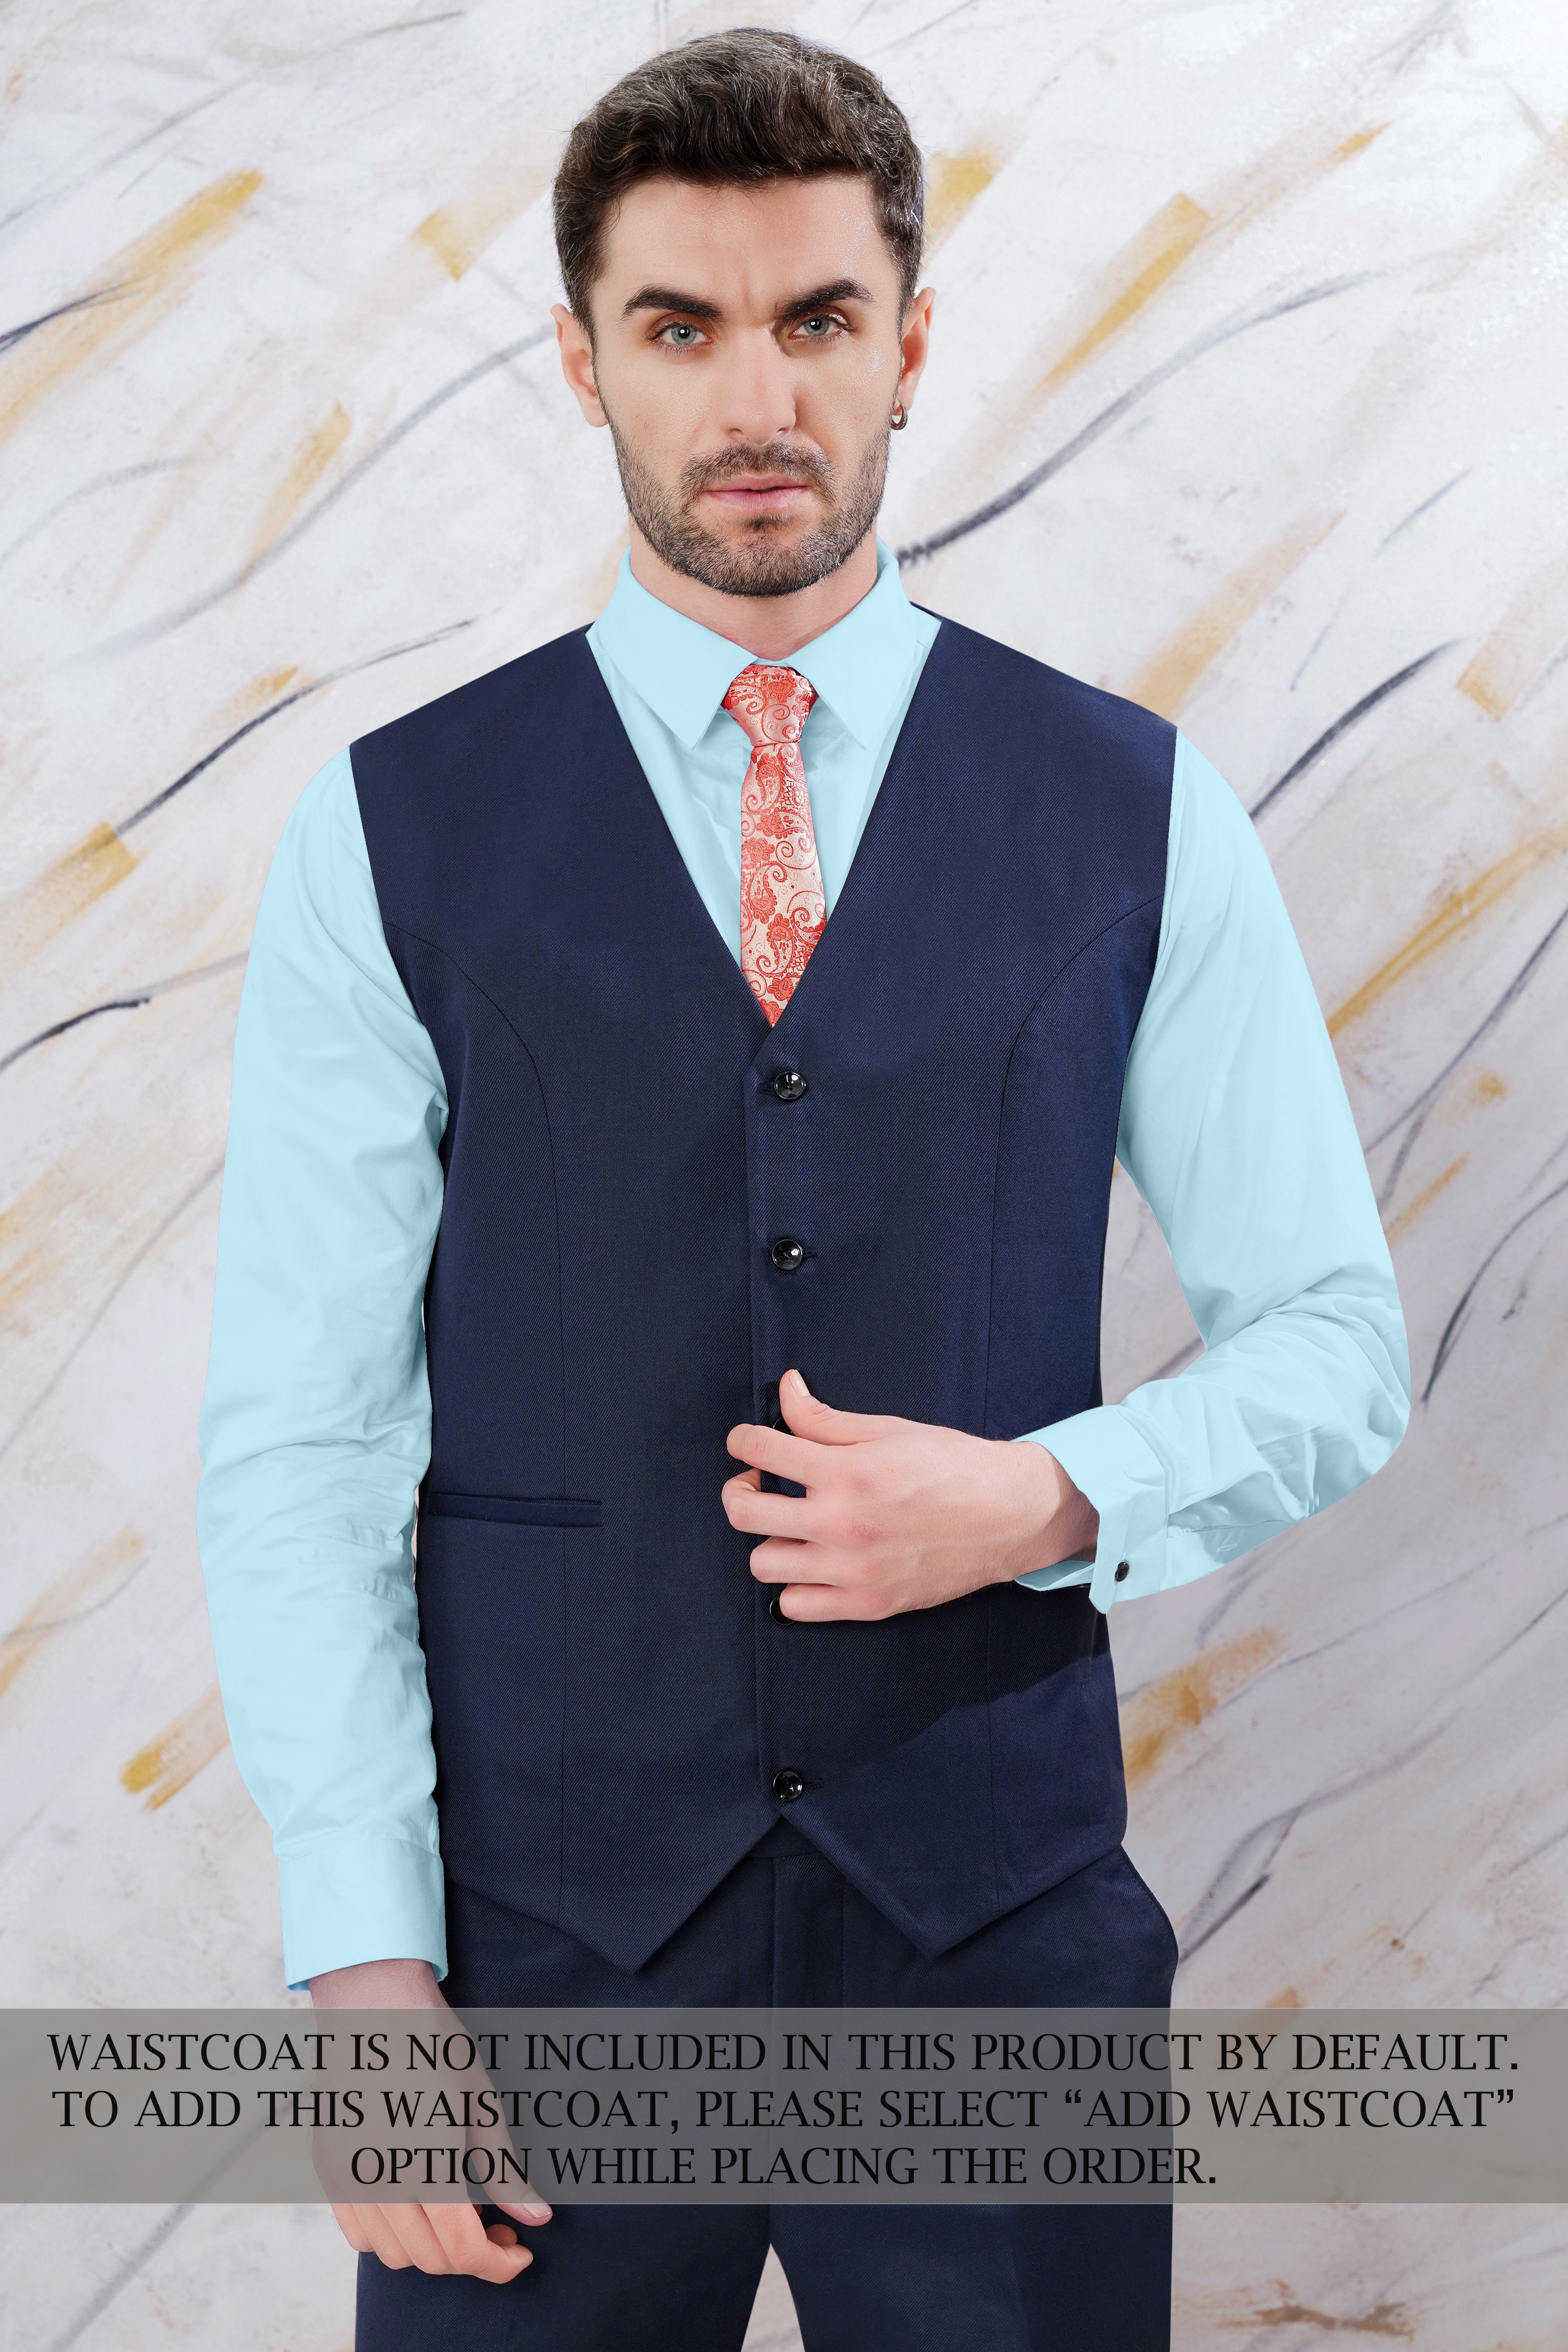 Haiti Blue Wool Rich Double Breasted Sports Suit ST3089-DB-PP-36, ST3089-DB-PP-38, ST3089-DB-PP-40, ST3089-DB-PP-42, ST3089-DB-PP-44, ST3089-DB-PP-46, ST3089-DB-PP-48, ST3089-DB-PP-50, ST3089-DB-PP-52, ST3089-DB-PP-54, ST3089-DB-PP-56, ST3089-DB-PP-58, ST3089-DB-PP-60